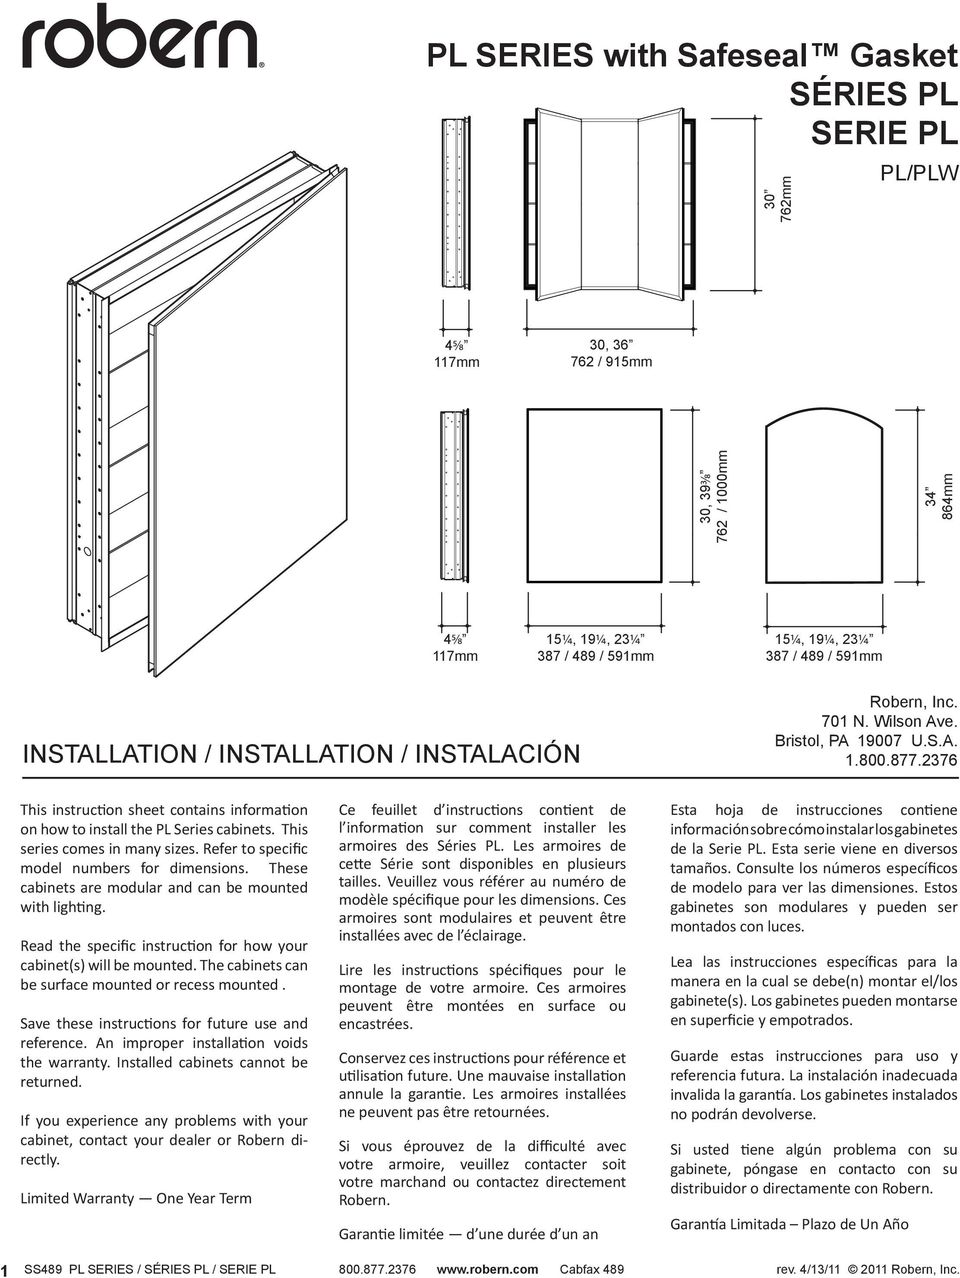 2376 This instruction sheet contains information on how to install the PL Series cabinets. This series comes in many sizes. Refer to specific model numbers for dimensions.